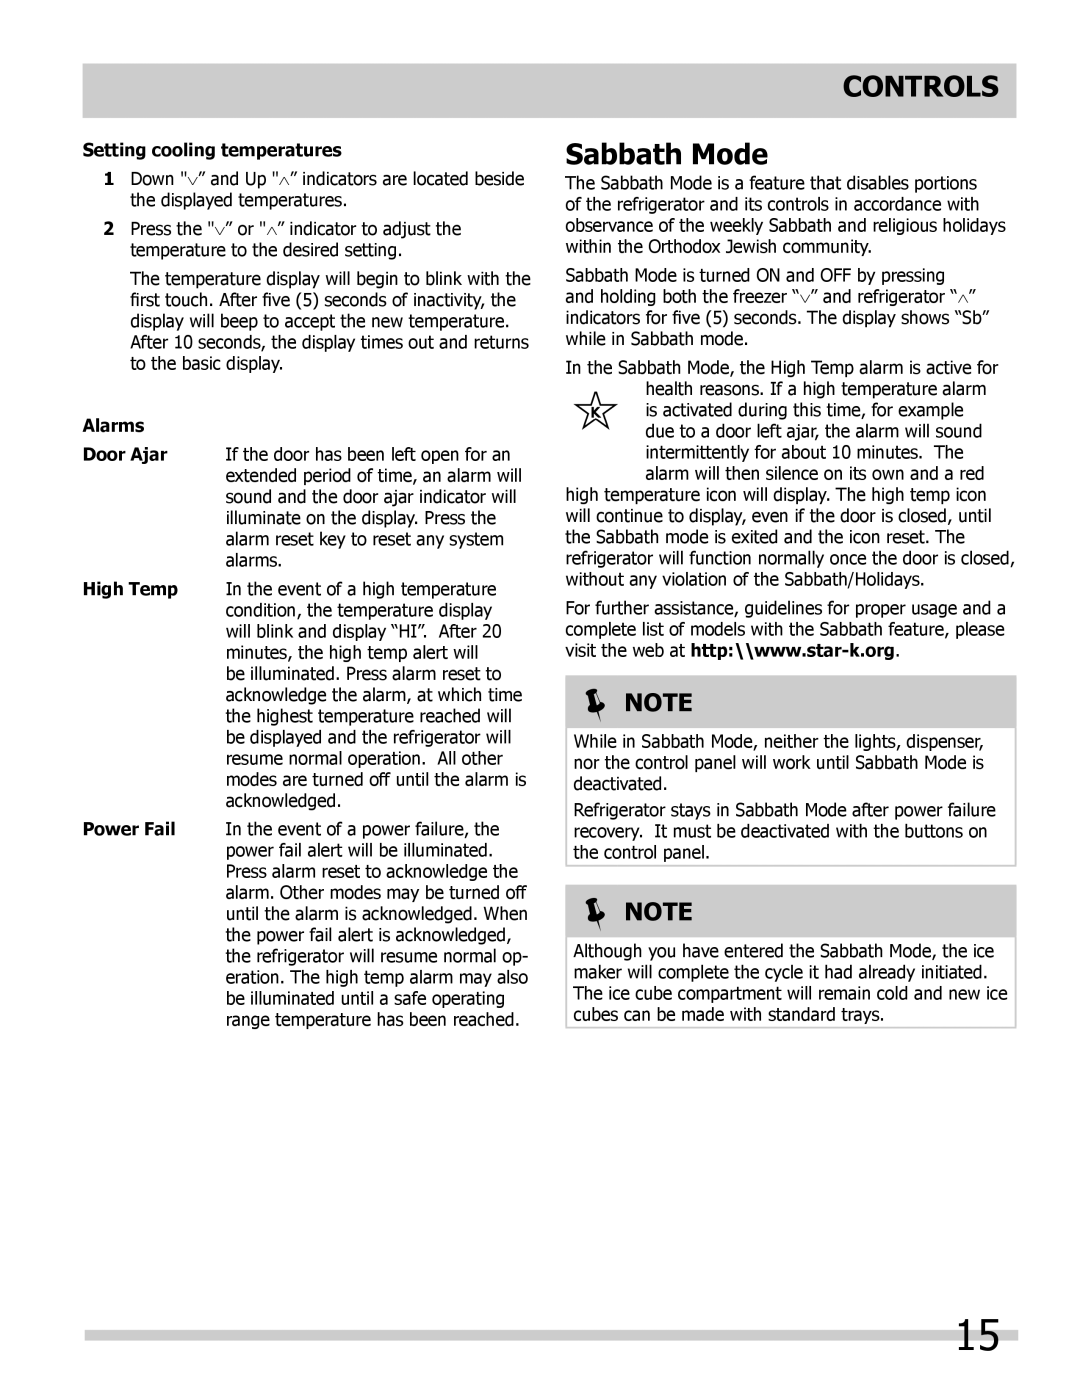 Frigidaire 242046800 important safety instructions Controls Sabbath Mode, Setting cooling temperatures, Alarms,  Note 